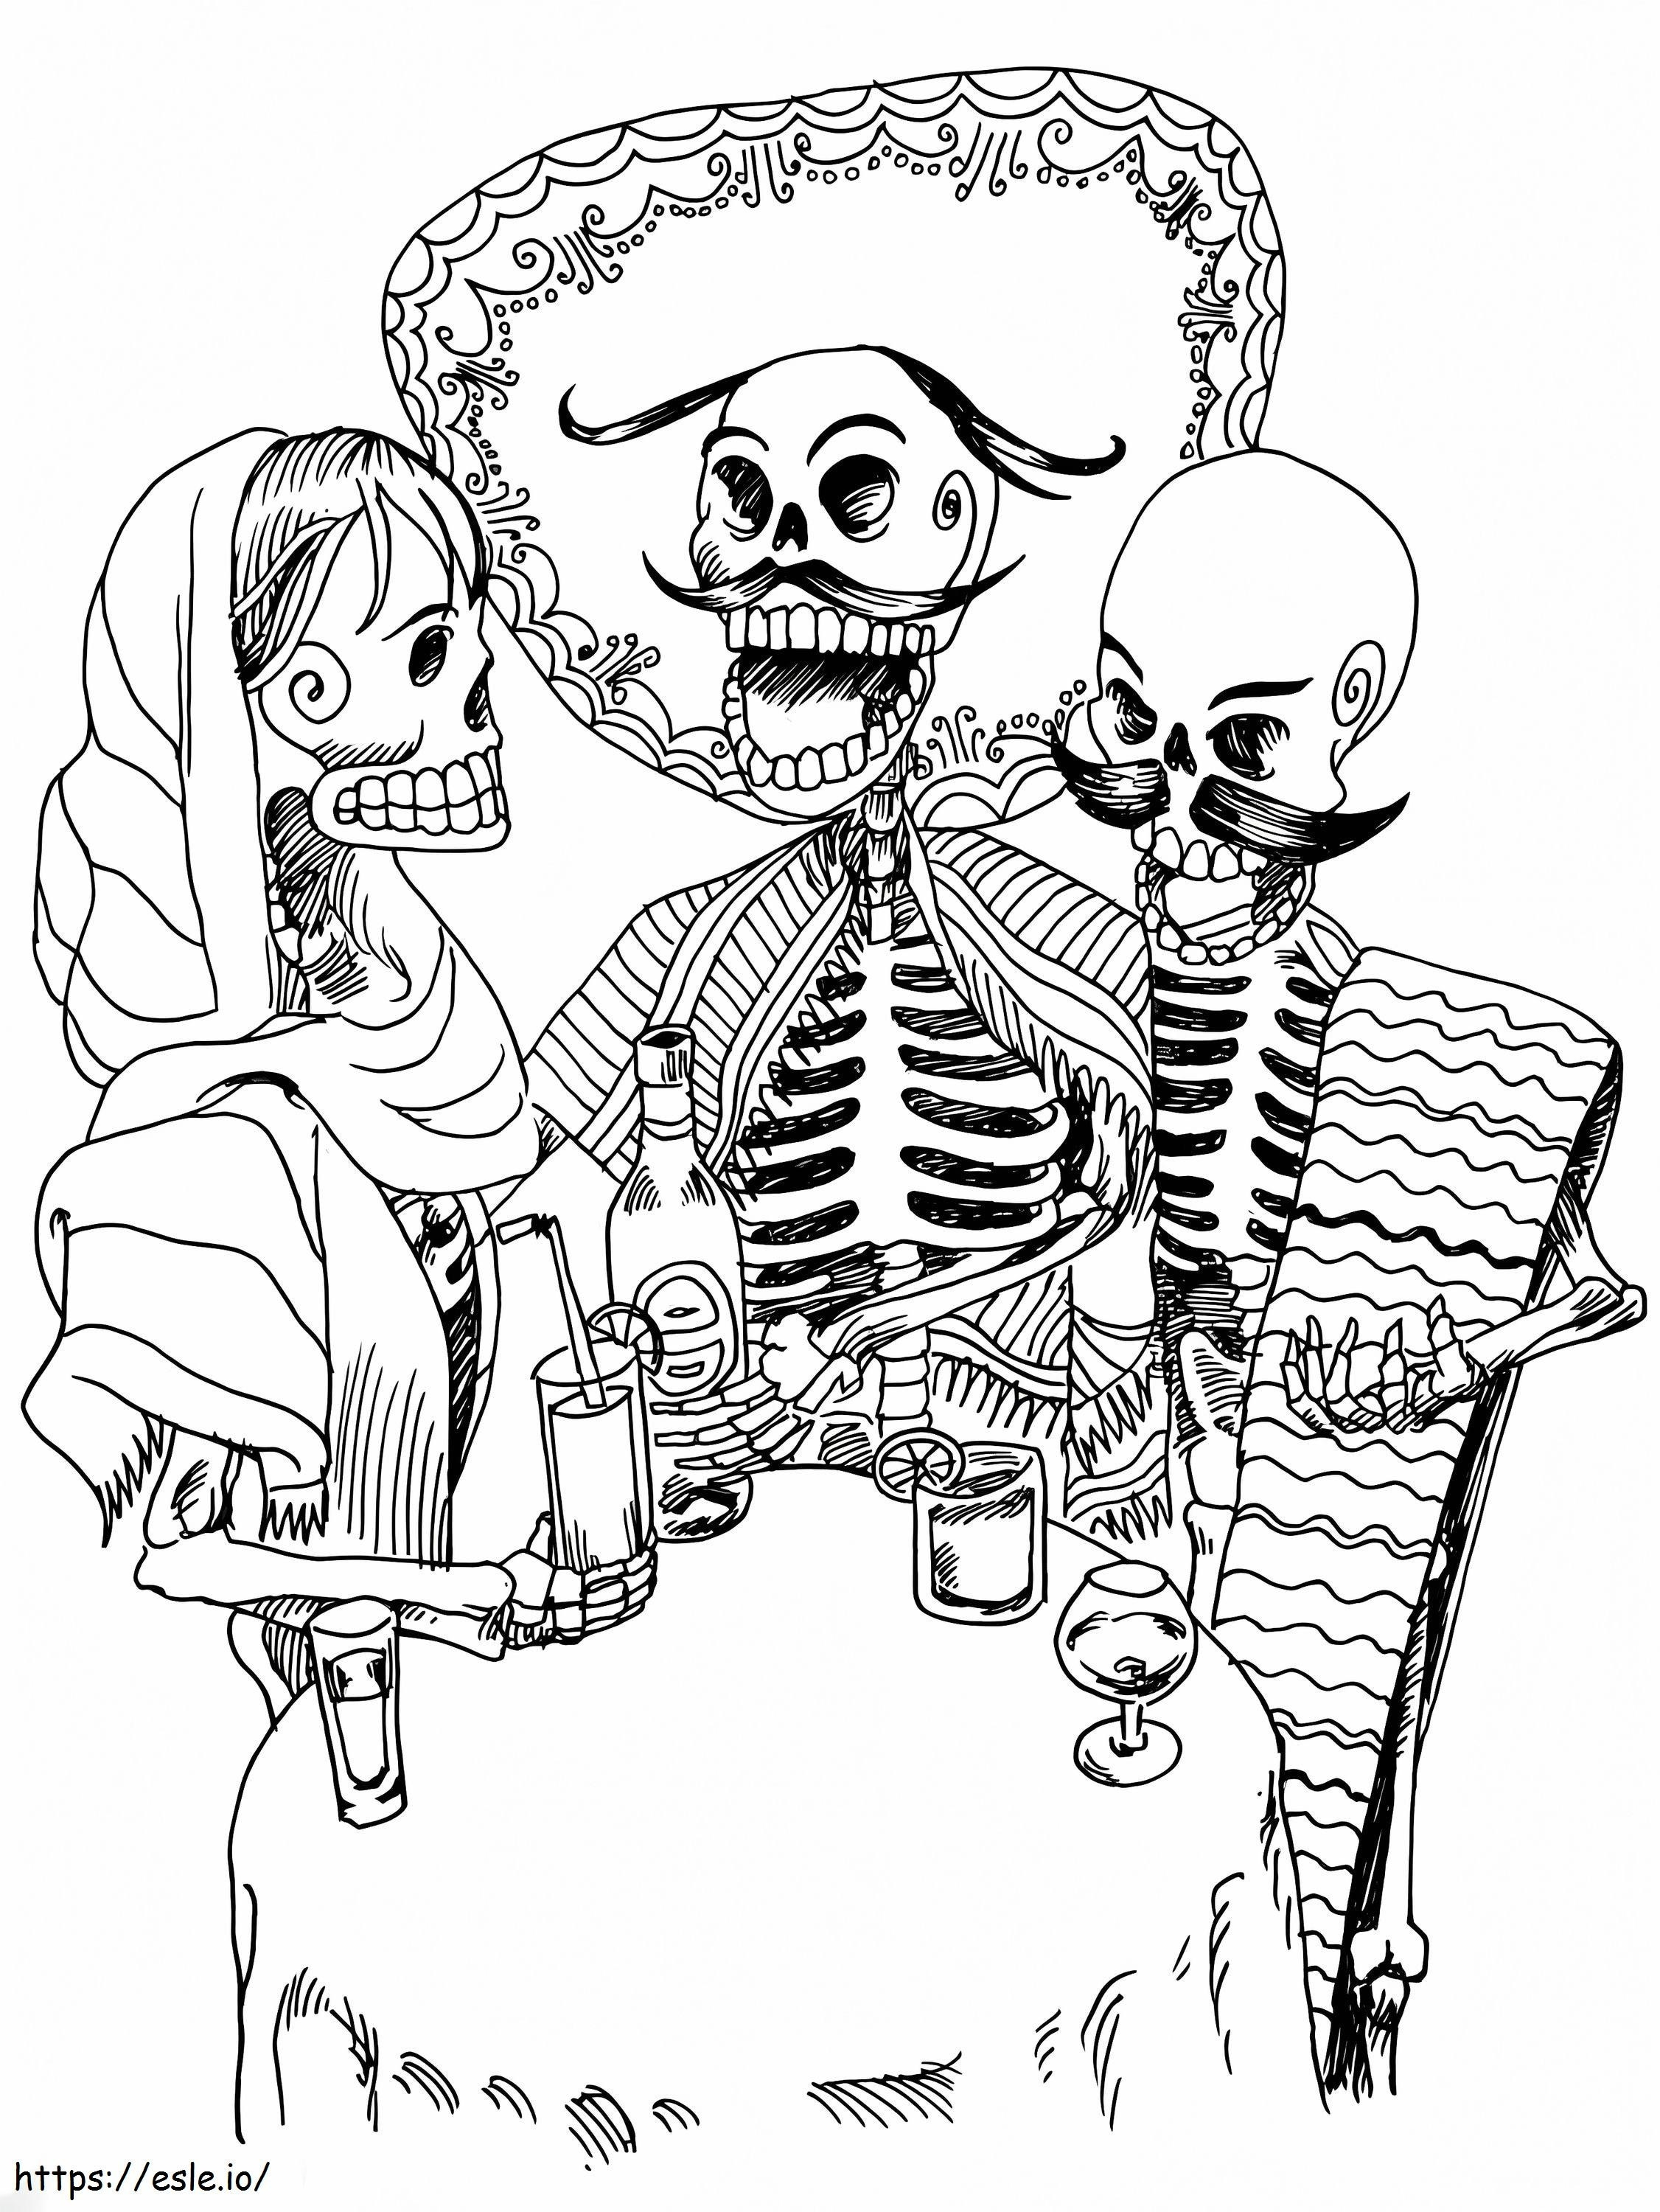 Horror Skeletons coloring page